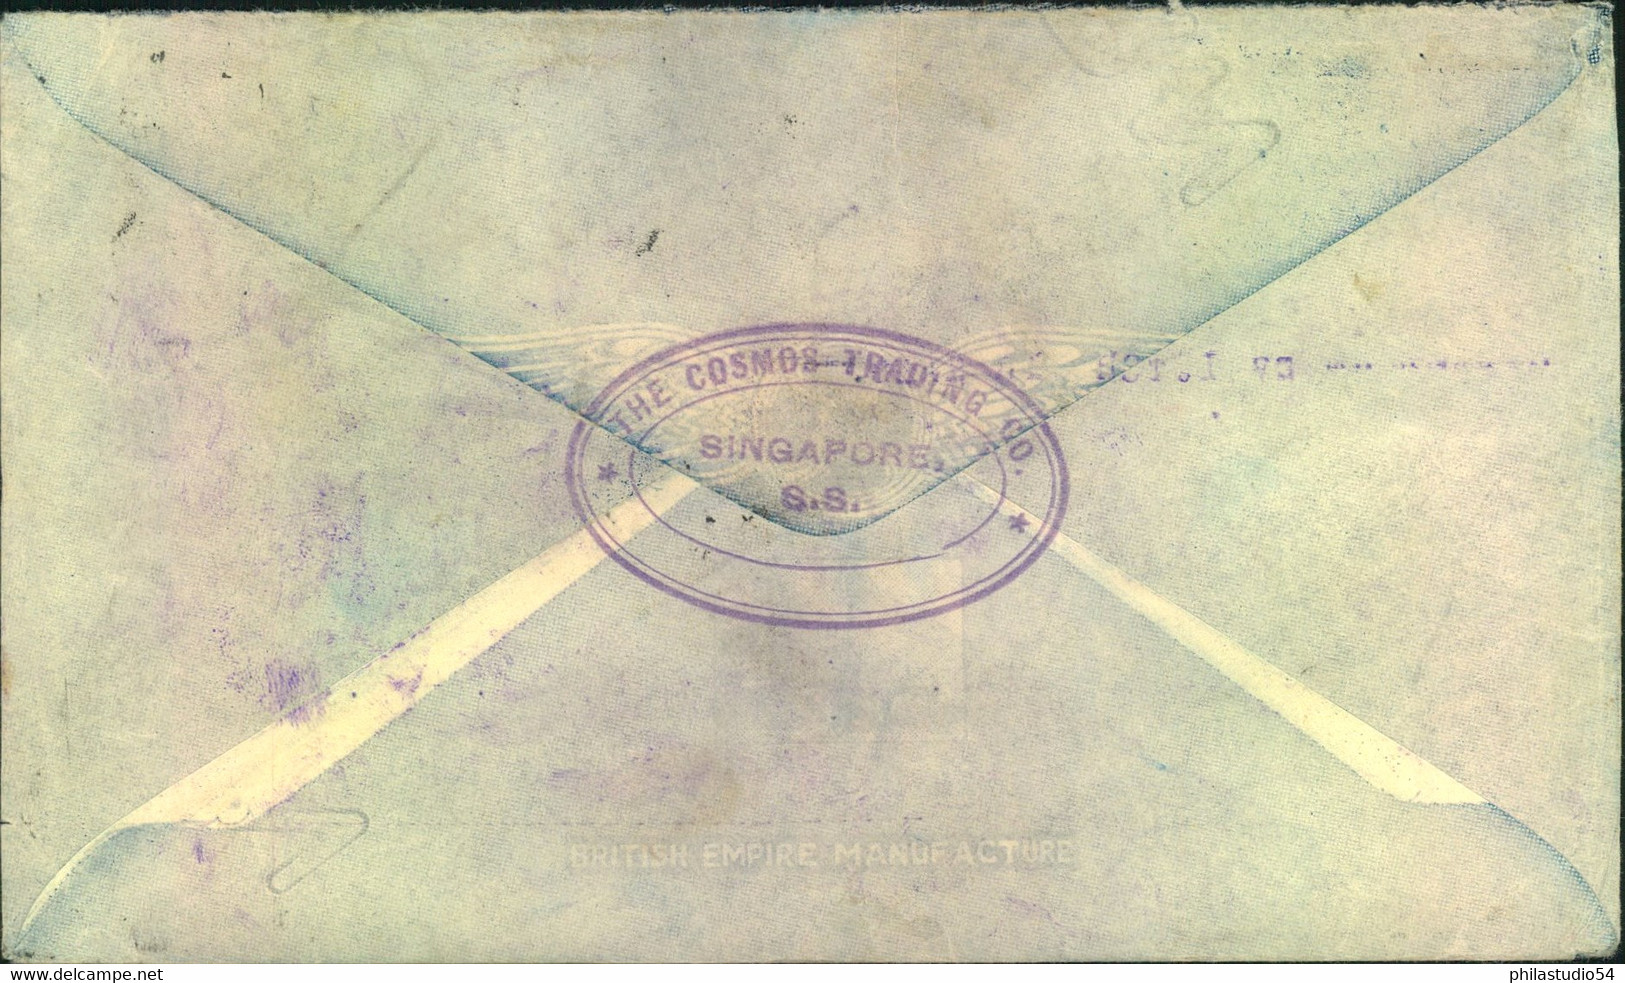 1936, 25 And 40 C Georg V On Letter "By Dutch Air Mail" From SINGAPORE To Trossingen, Württemberg - Singapore (...-1959)